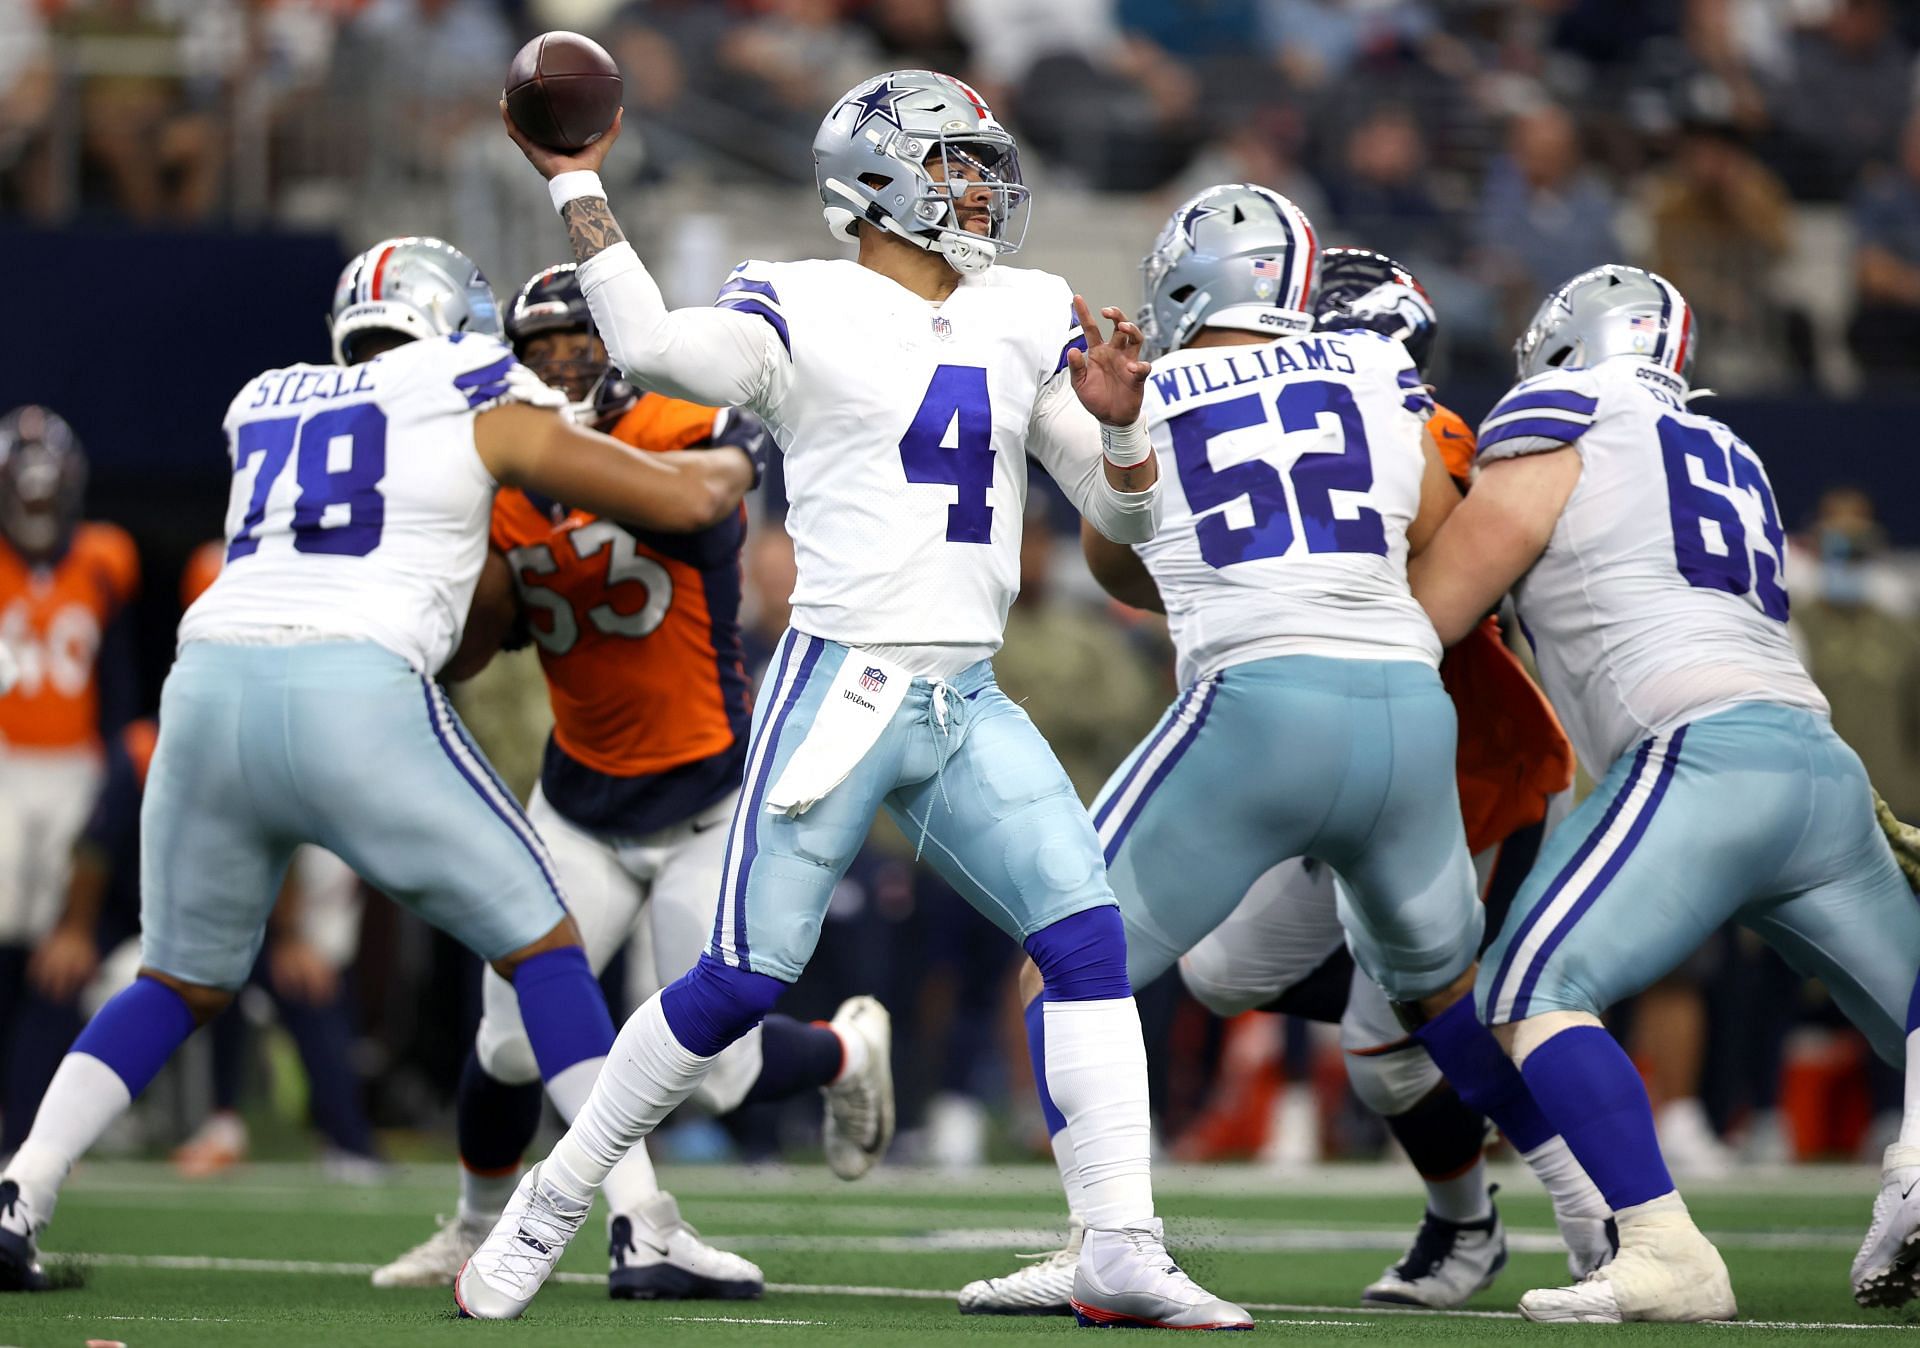 2022 Dallas Cowboys schedule: Times, dates announced with 5 prime time games